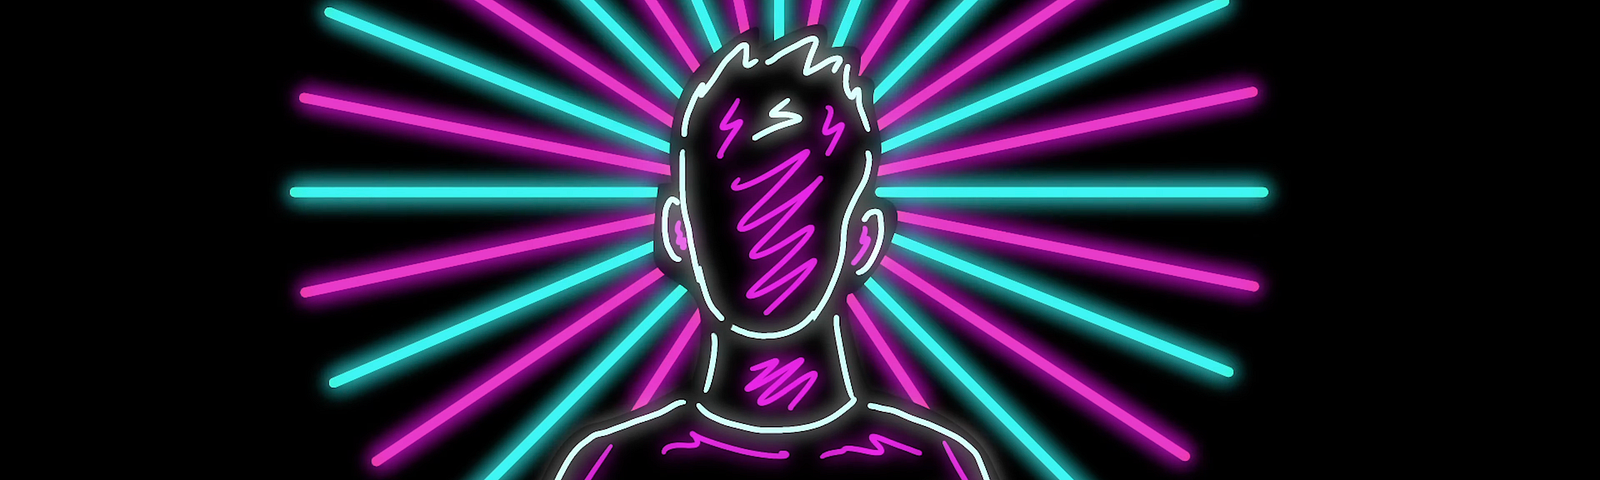 Film still from Reviving the Roost by Vivek Shraya of  a neon image of a human ouline with short hair wearing a t-shirt, haloed by purple and aqua lines.